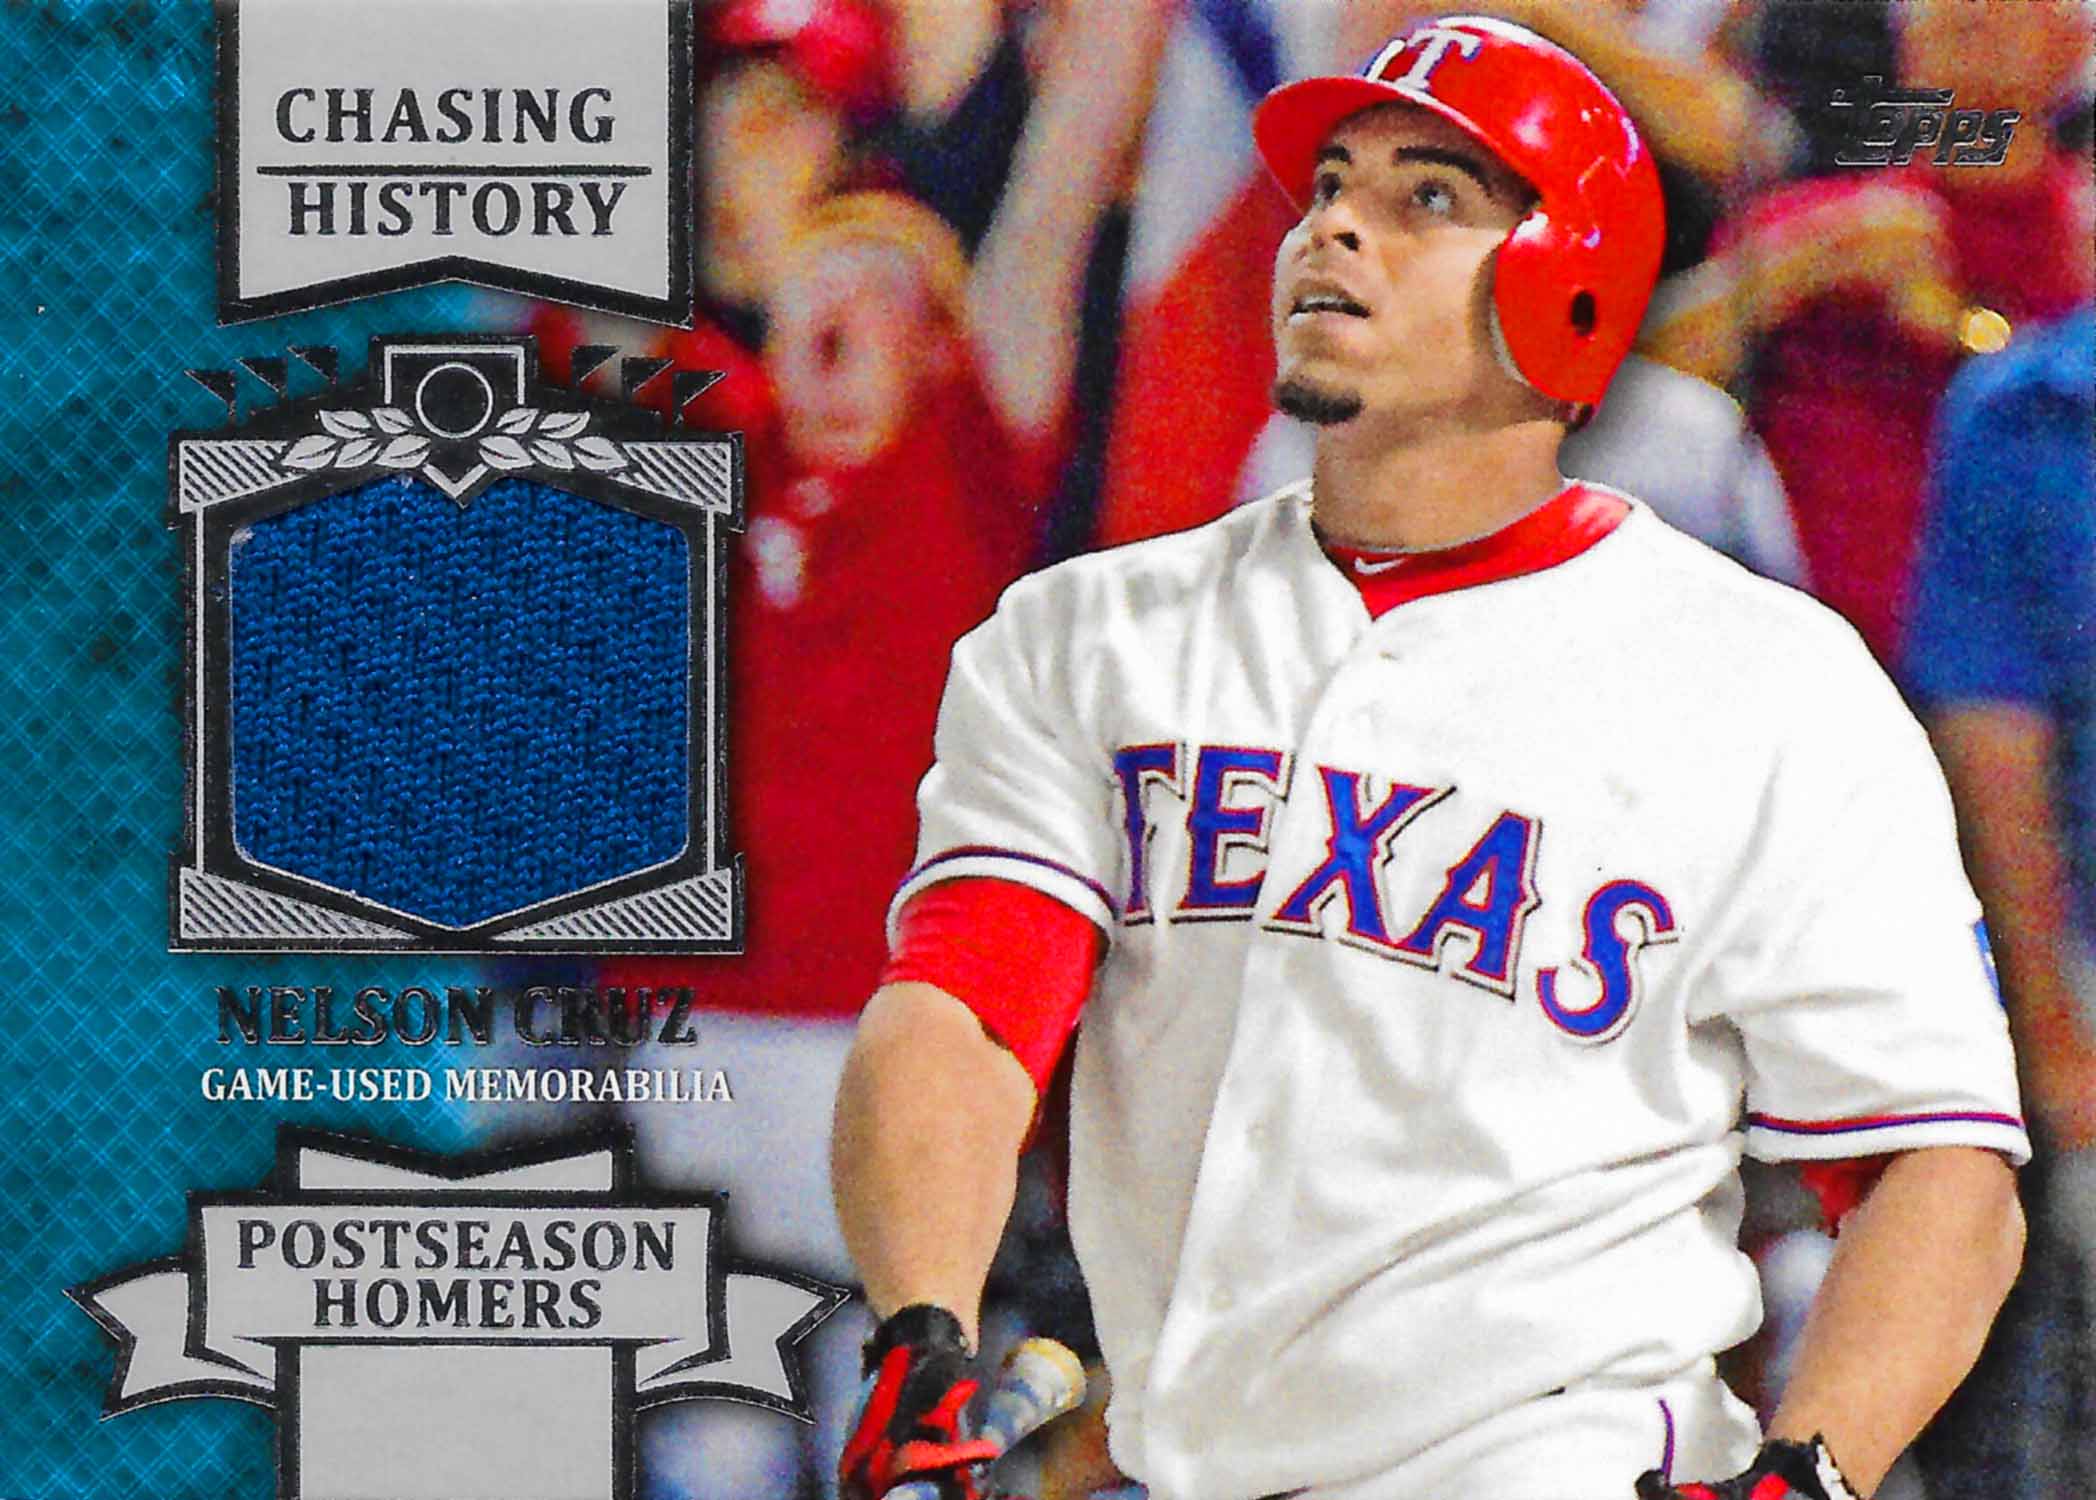 2013 Topps Chasing History Relics